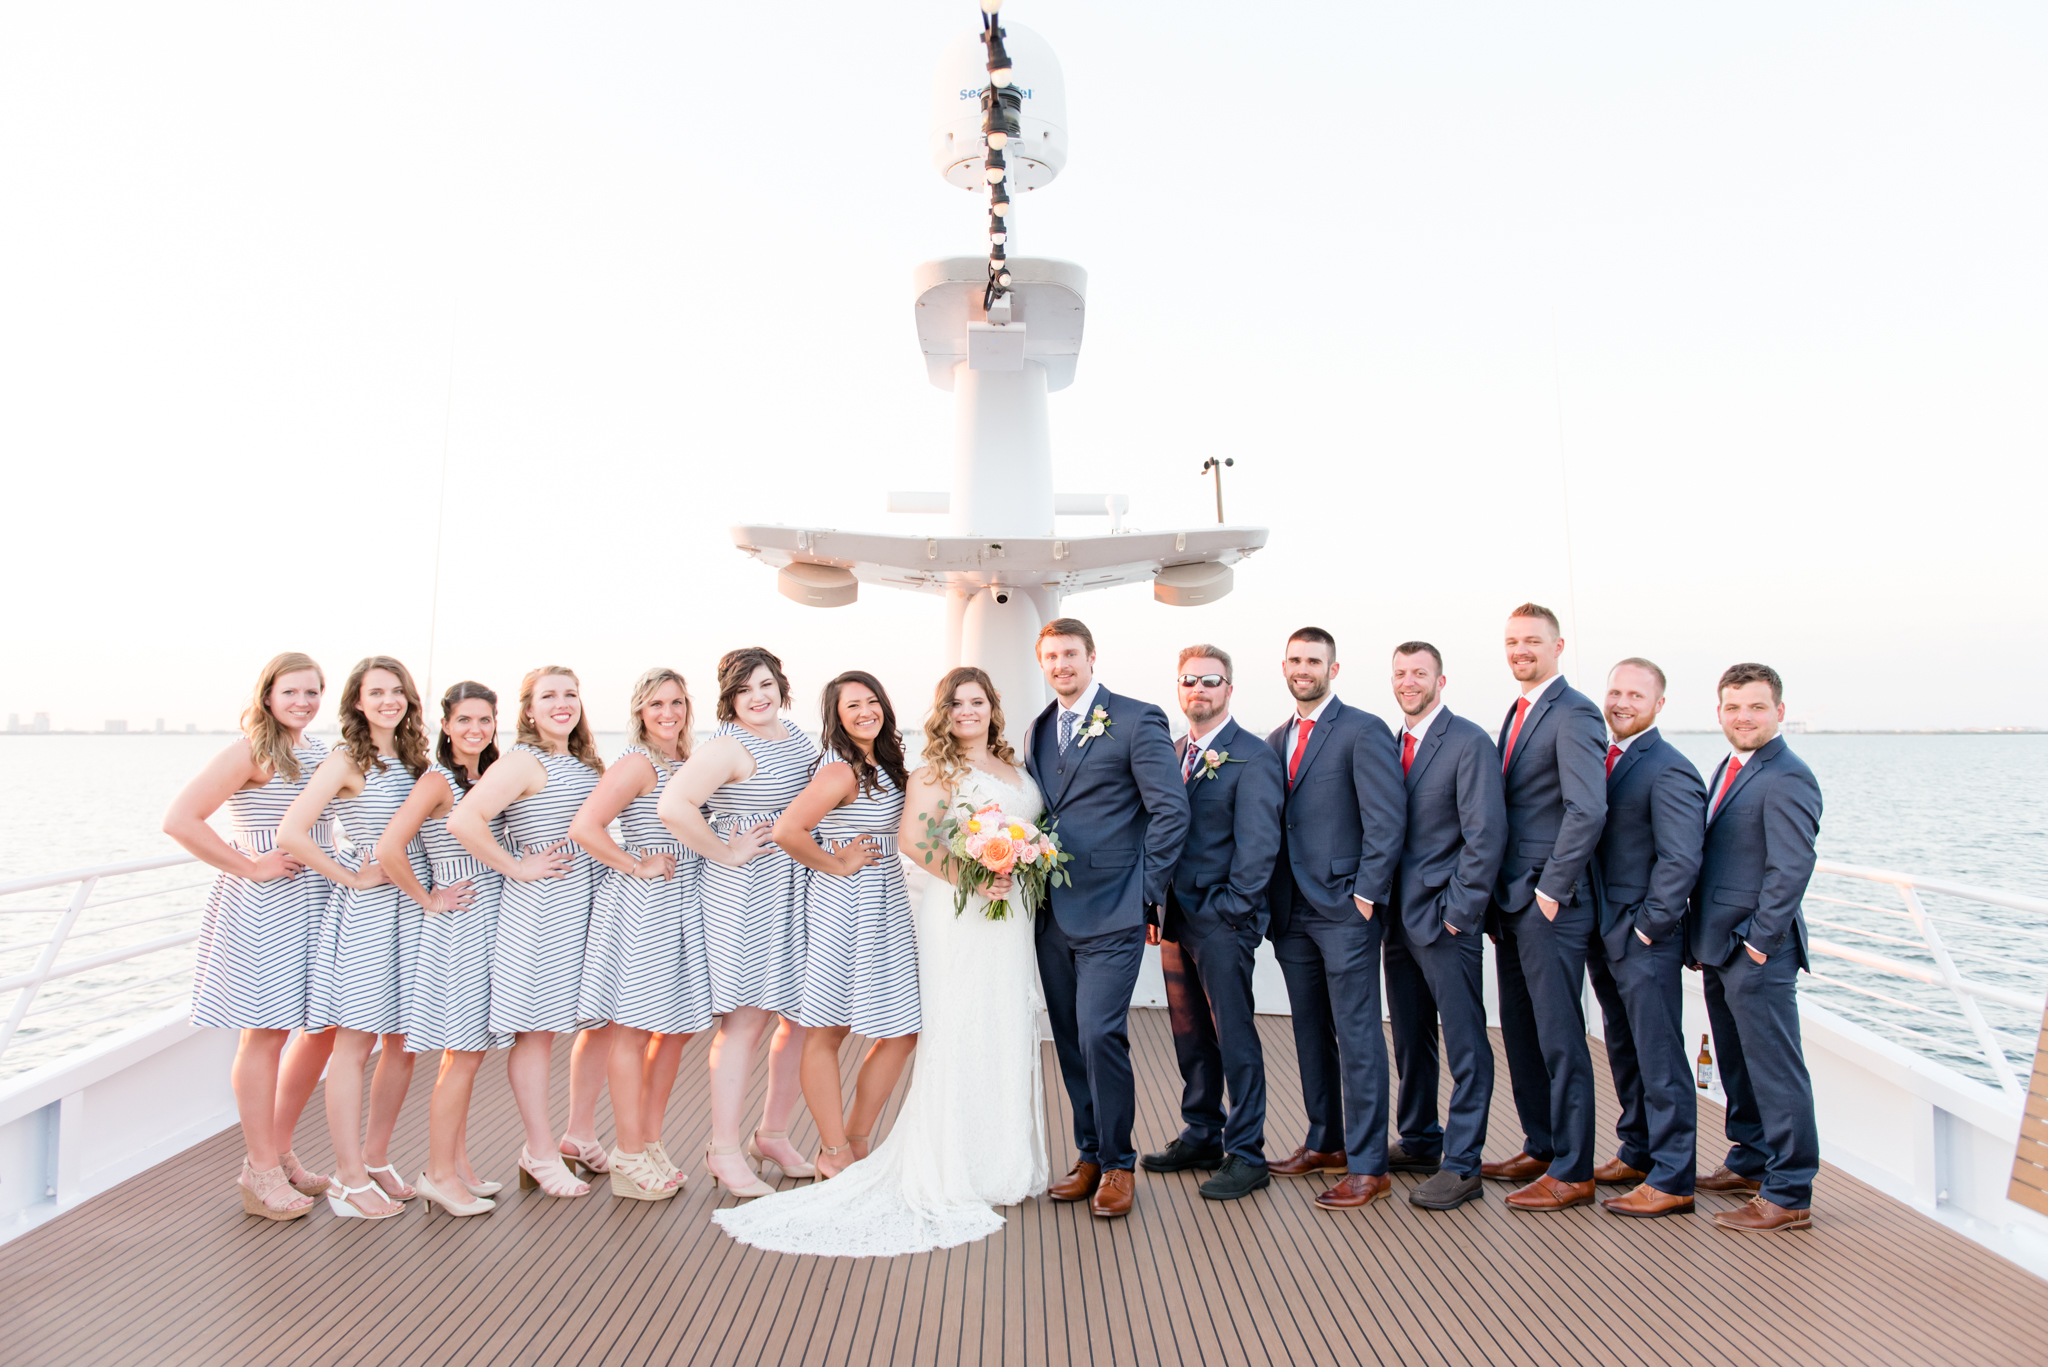 Wedding party smiles at camera on yacht.